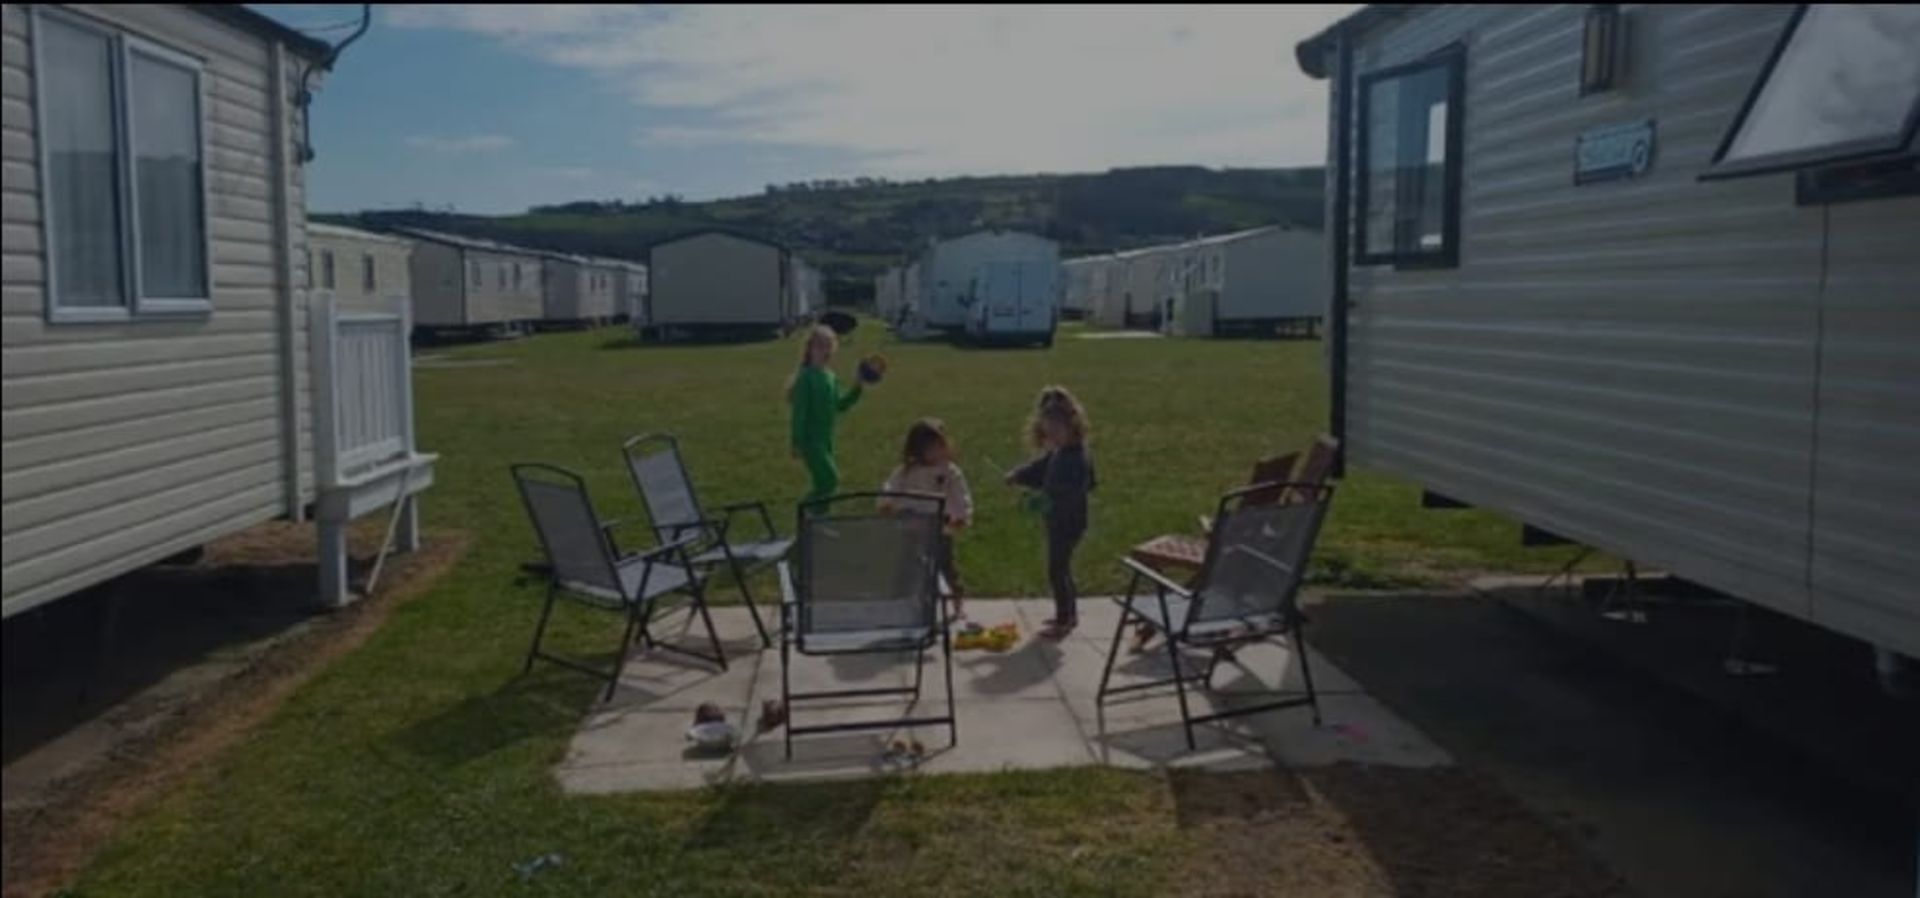 2015 WILLERBY ECO SALSA 3 BEDROOM holiday home ON-SITE SALE. **ON SALE** - Image 12 of 13